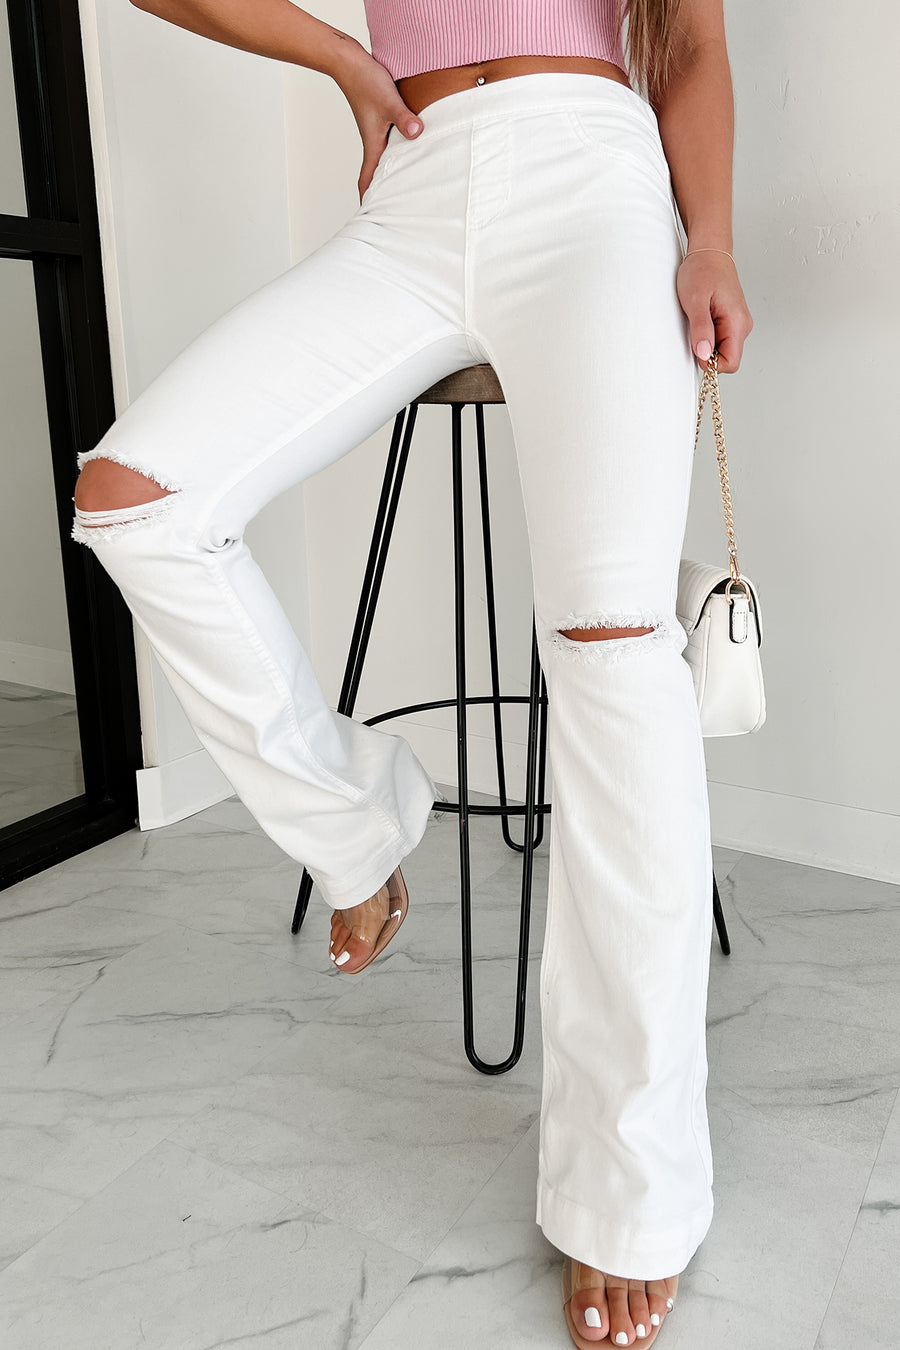 County Line Mid-Rise Distressed Flare Jeans (White) - NanaMacs